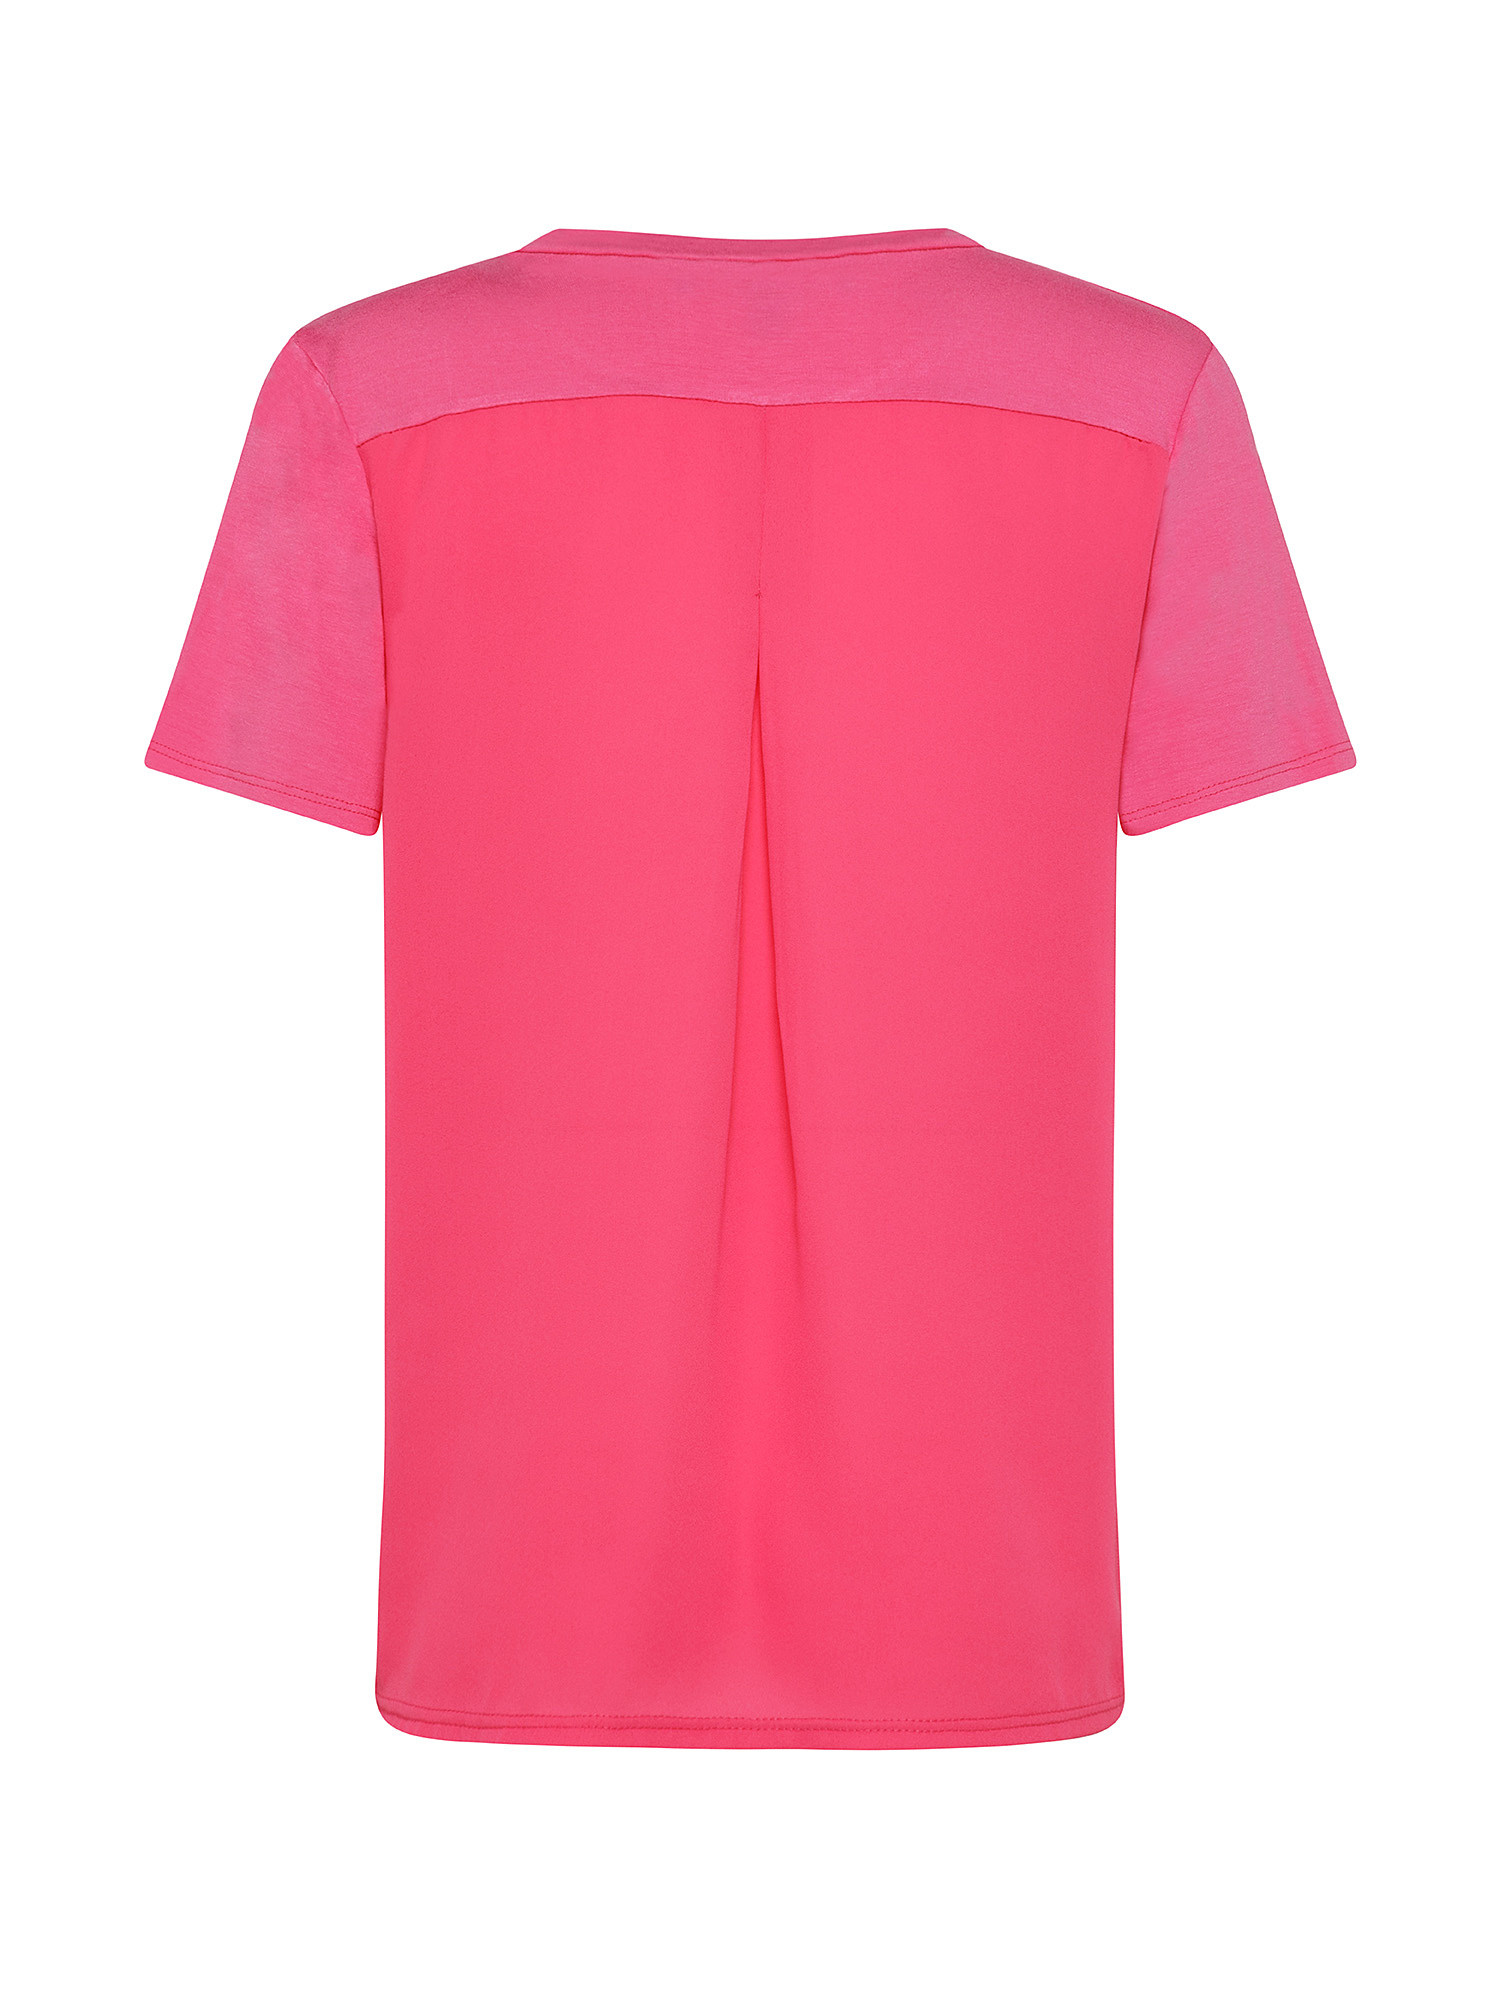 T-shirt con dorso in tessuto, Rosa fuxia, large image number 1